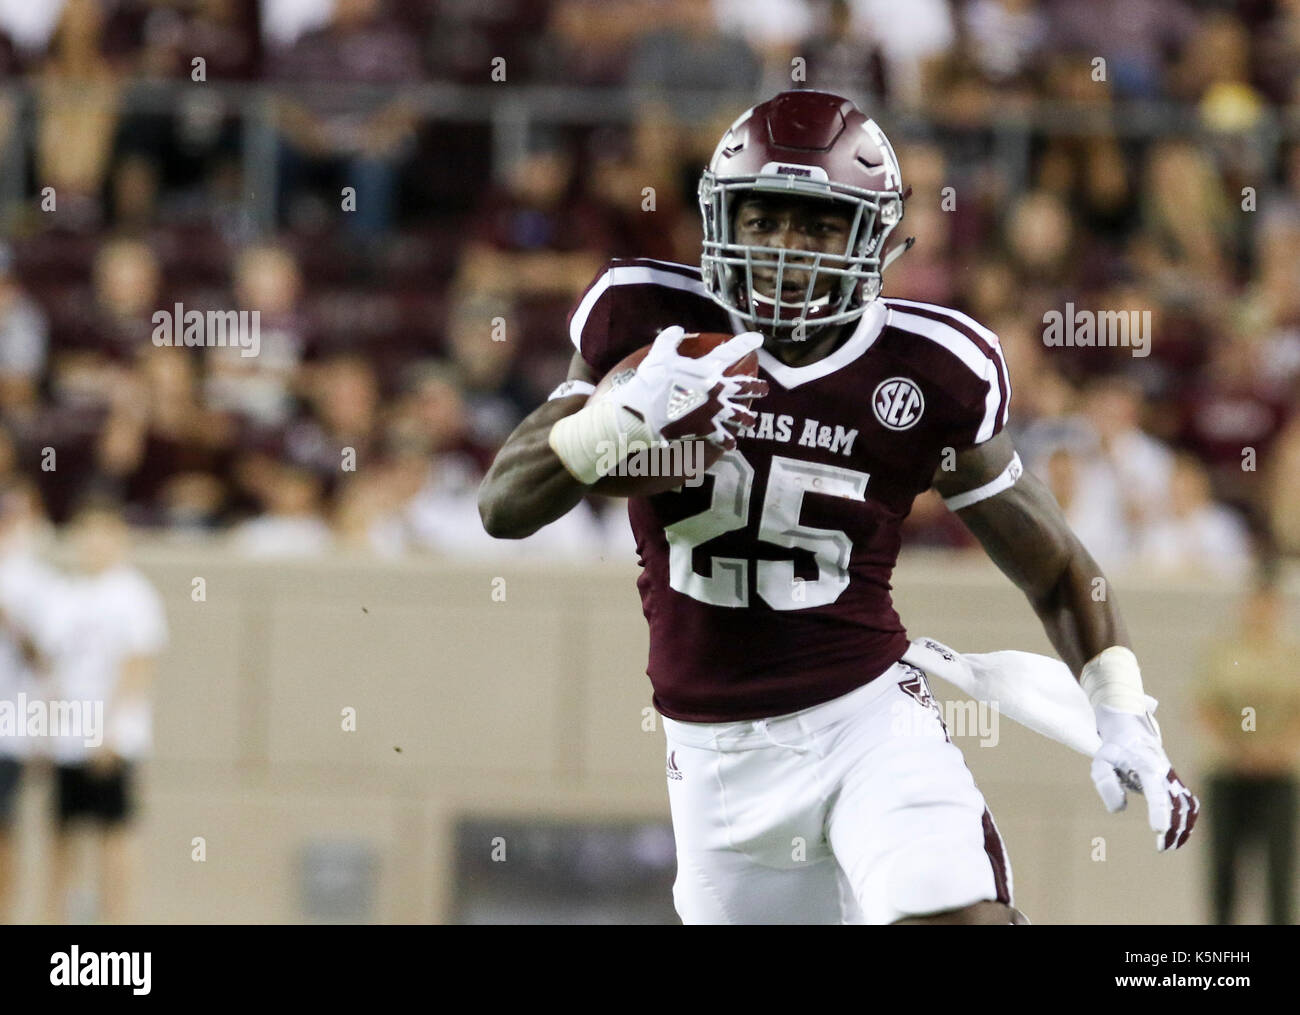 September 9, 2017: Texas A&M Aggies running back Kendall Bussey (25) sheds a tackle in the fourth quarter during the NCAA football game between the Nicholls State Colonels and the Texas A&M Aggies at Kyle Field in College Station, TX; John Glaser/CSM. Stock Photo